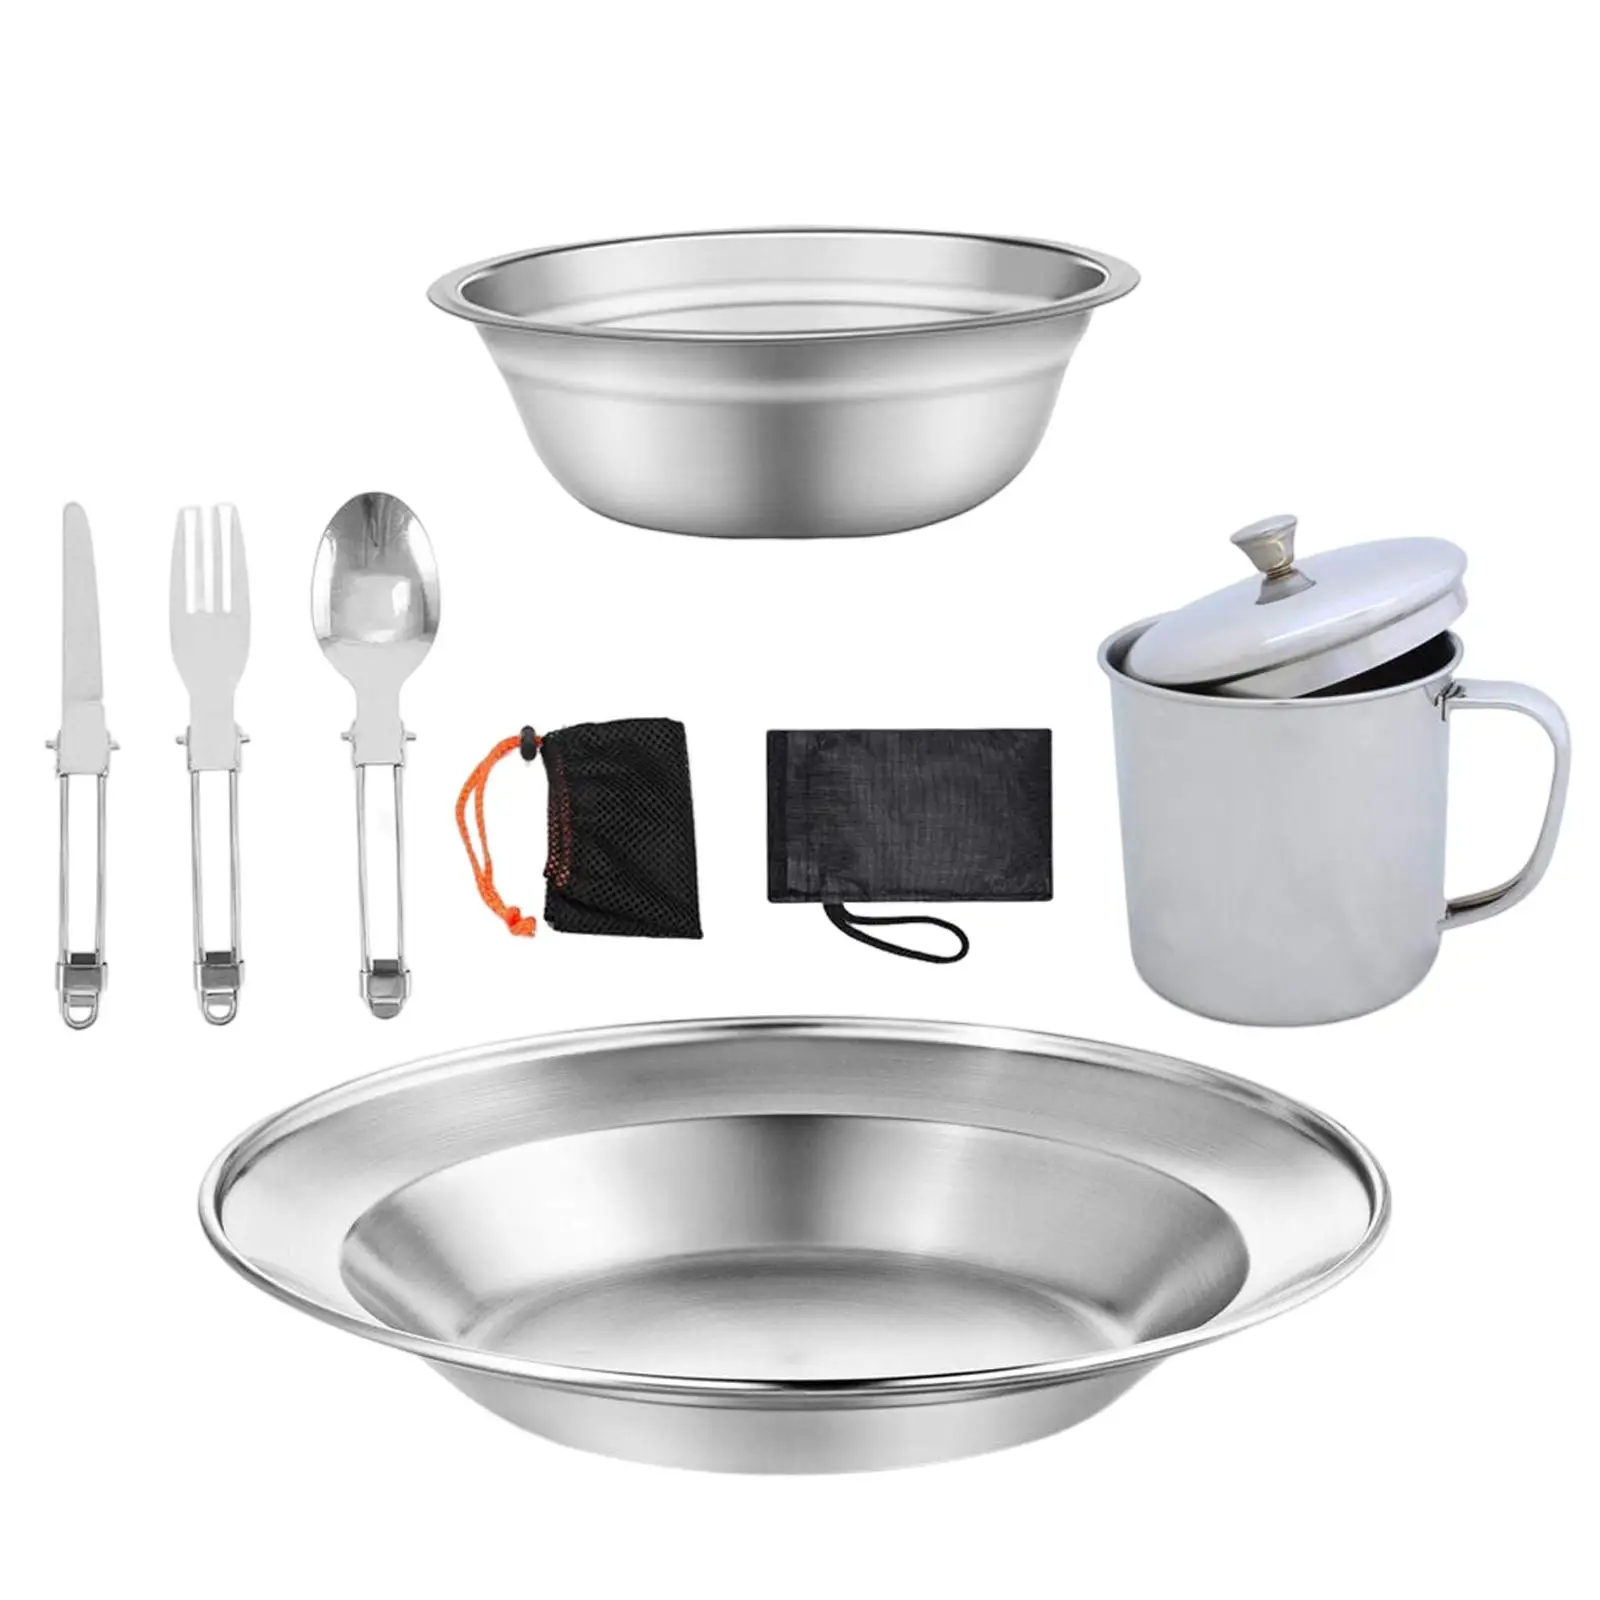 Utensils Camping Tableware Kit Stainless Steel for Backpacking Picnic Space Saving Reusable Durable Accessories Compact Size